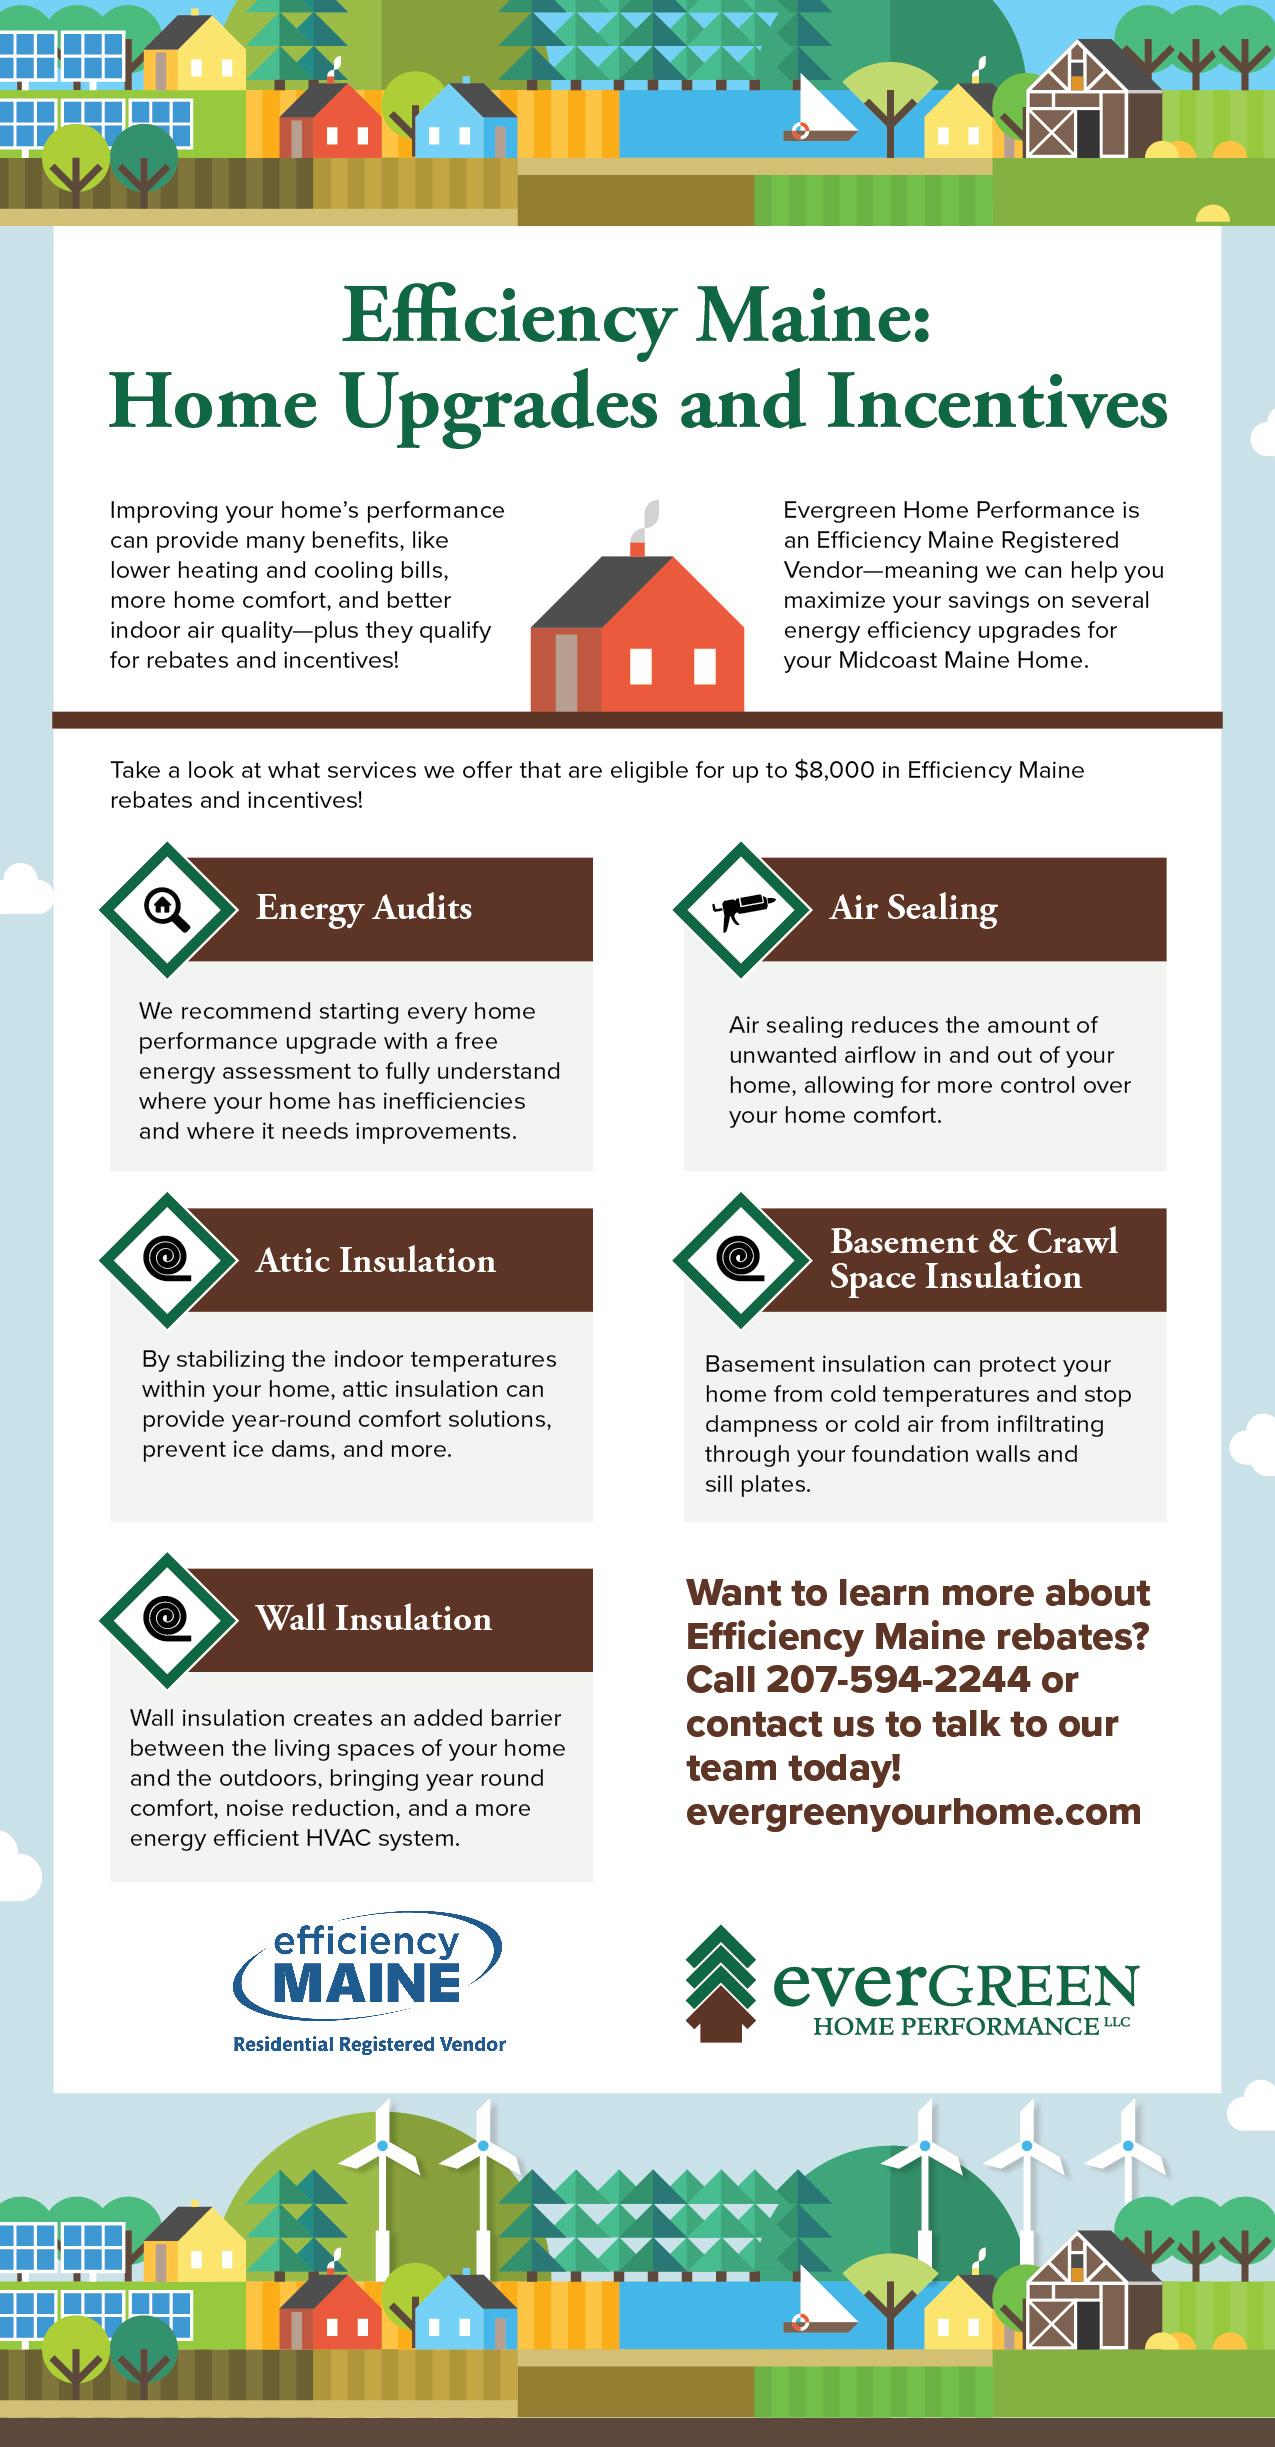 Efficiency Maine: Home Upgrades and Incentives infographic 